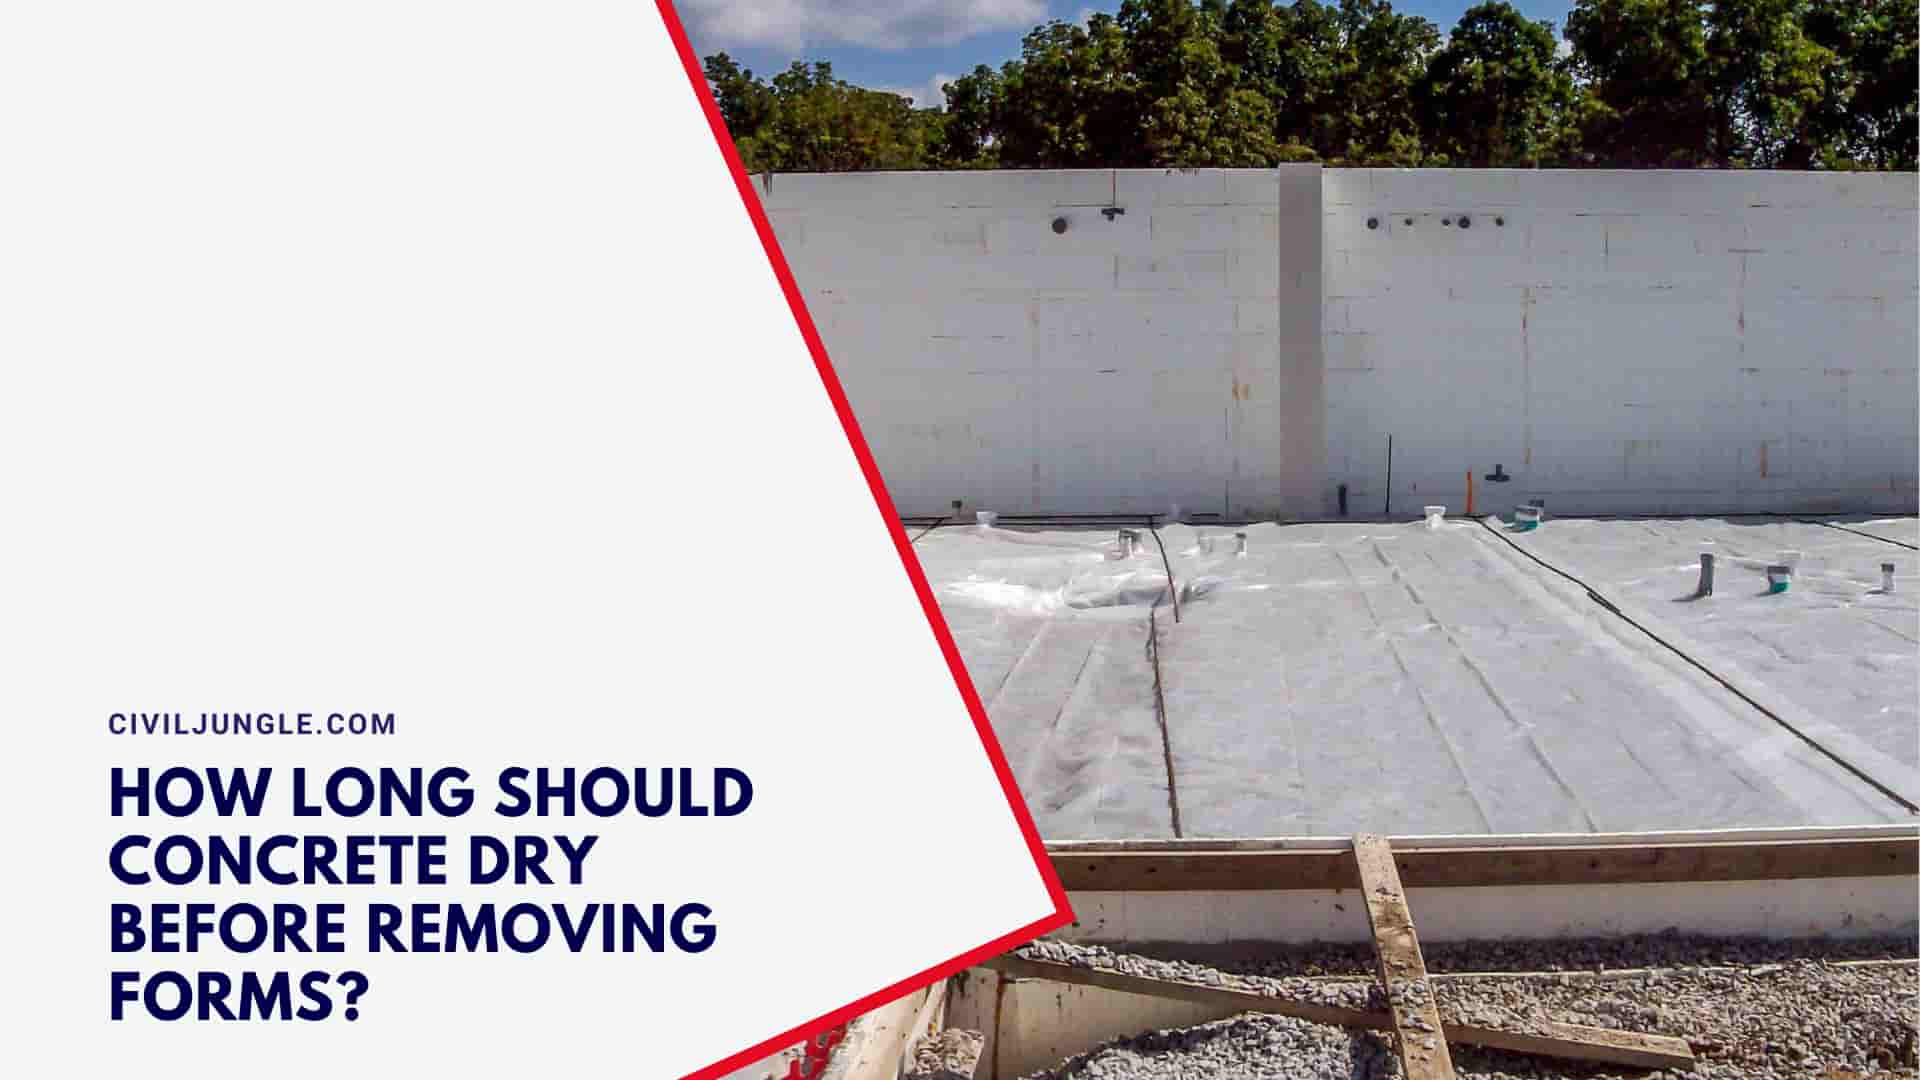 How Long Should Concrete Dry Before Removing Forms?